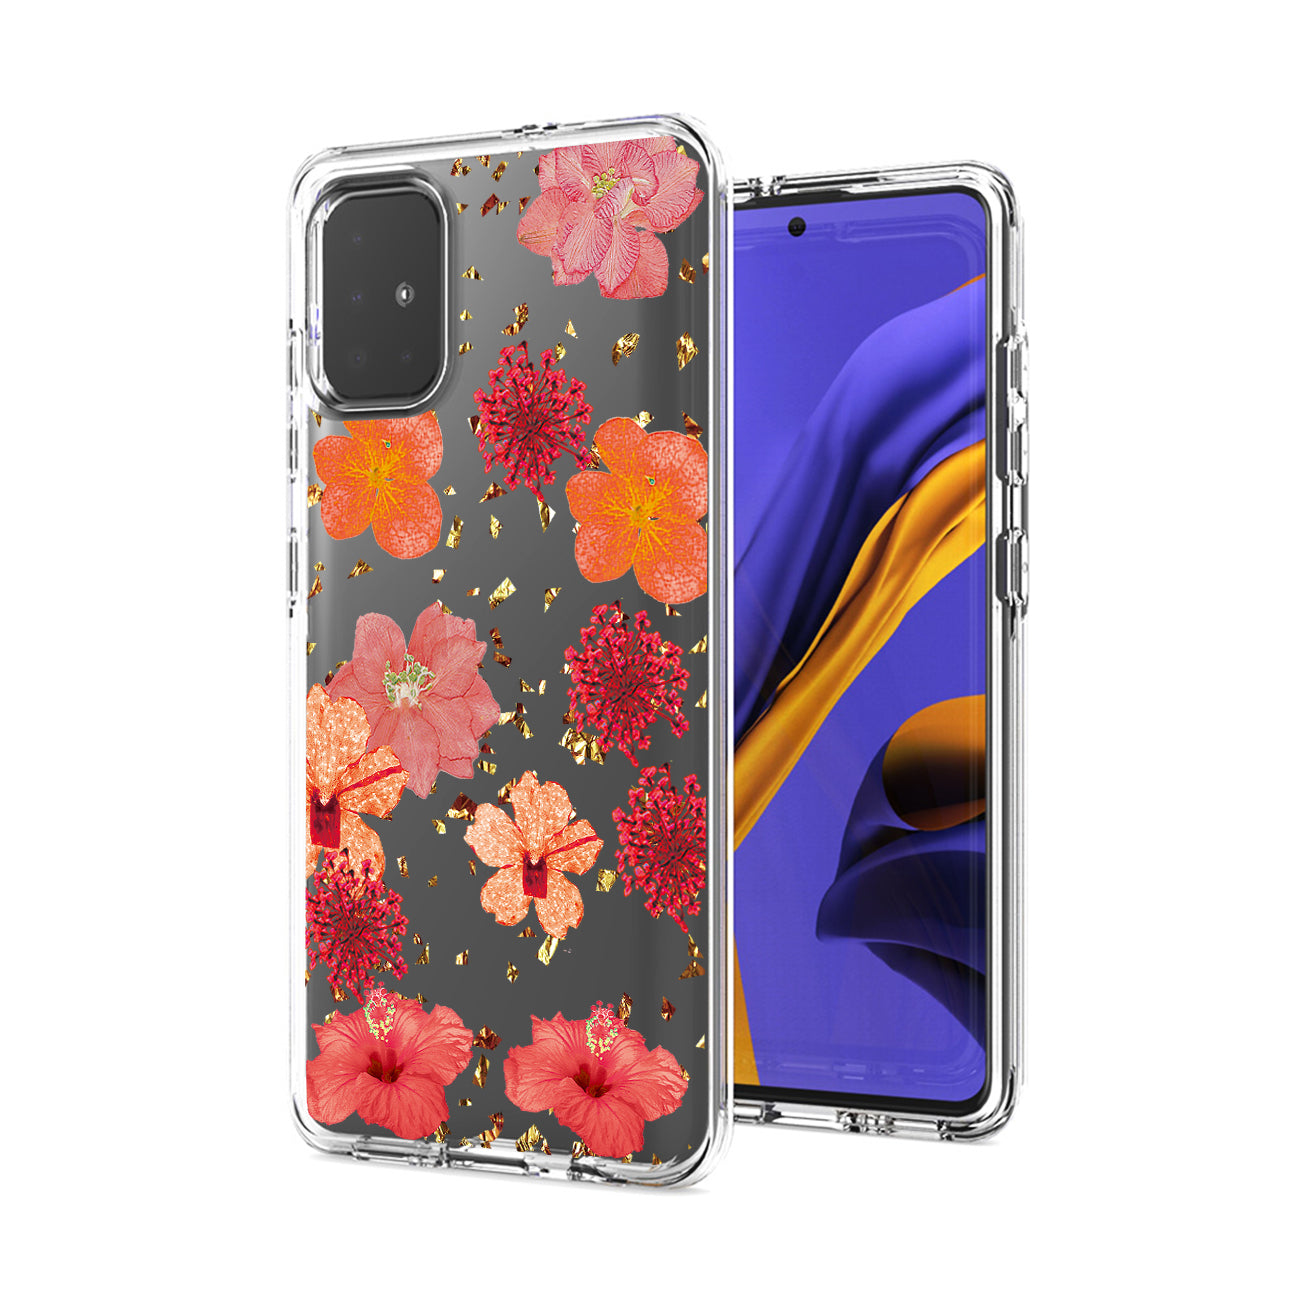 Pressed dried flower Design Phone case for SAMSUNG GALAXY A51 5G In Red